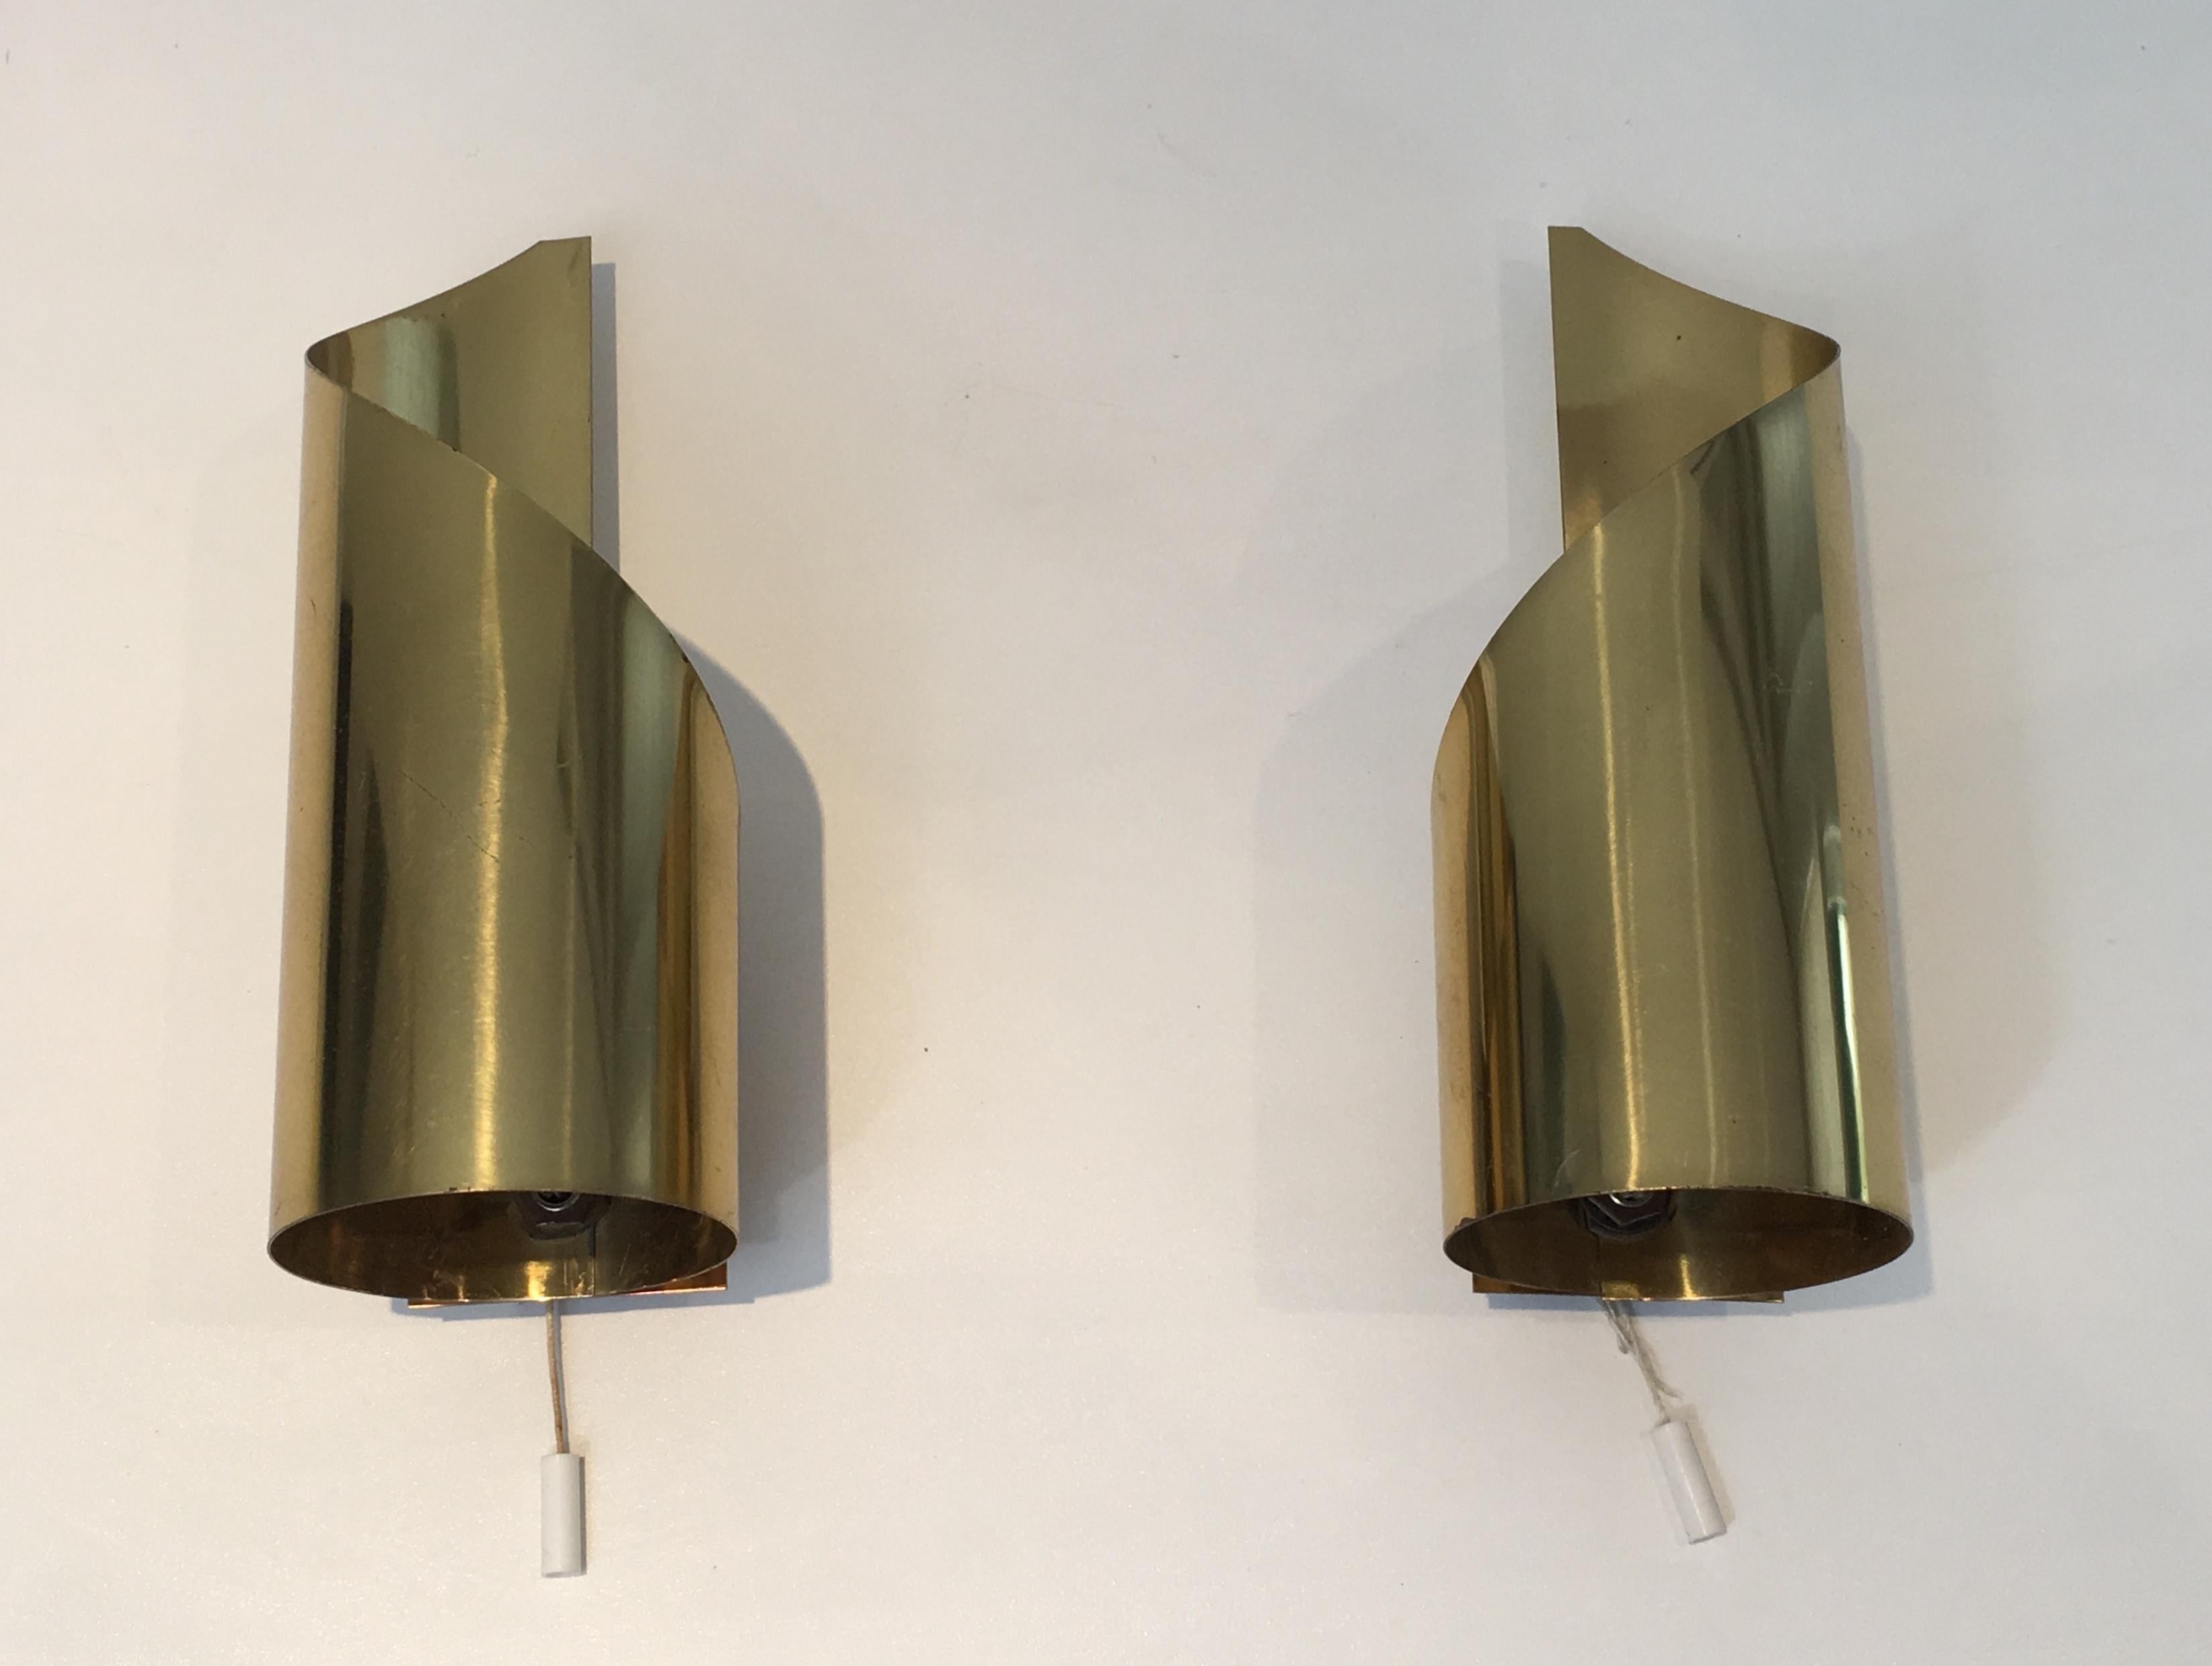 Pair of design brass sconces made of curved sheets of Brass. Circa 1960.